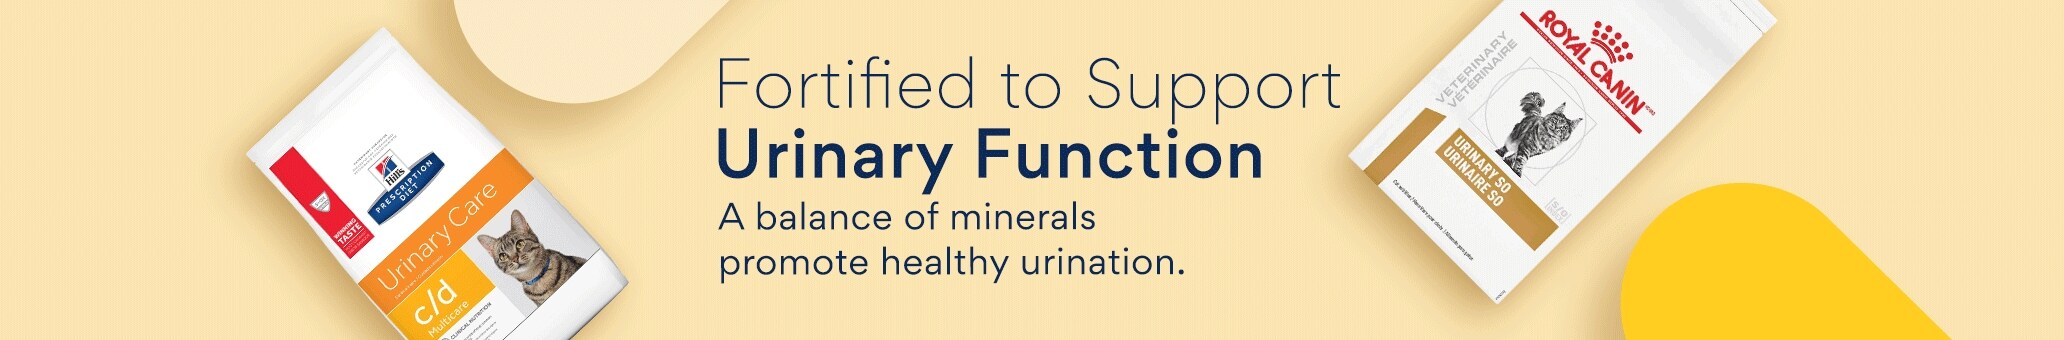 Fortified to Support Urinary Function. A balance of minerals promote healthy urination.